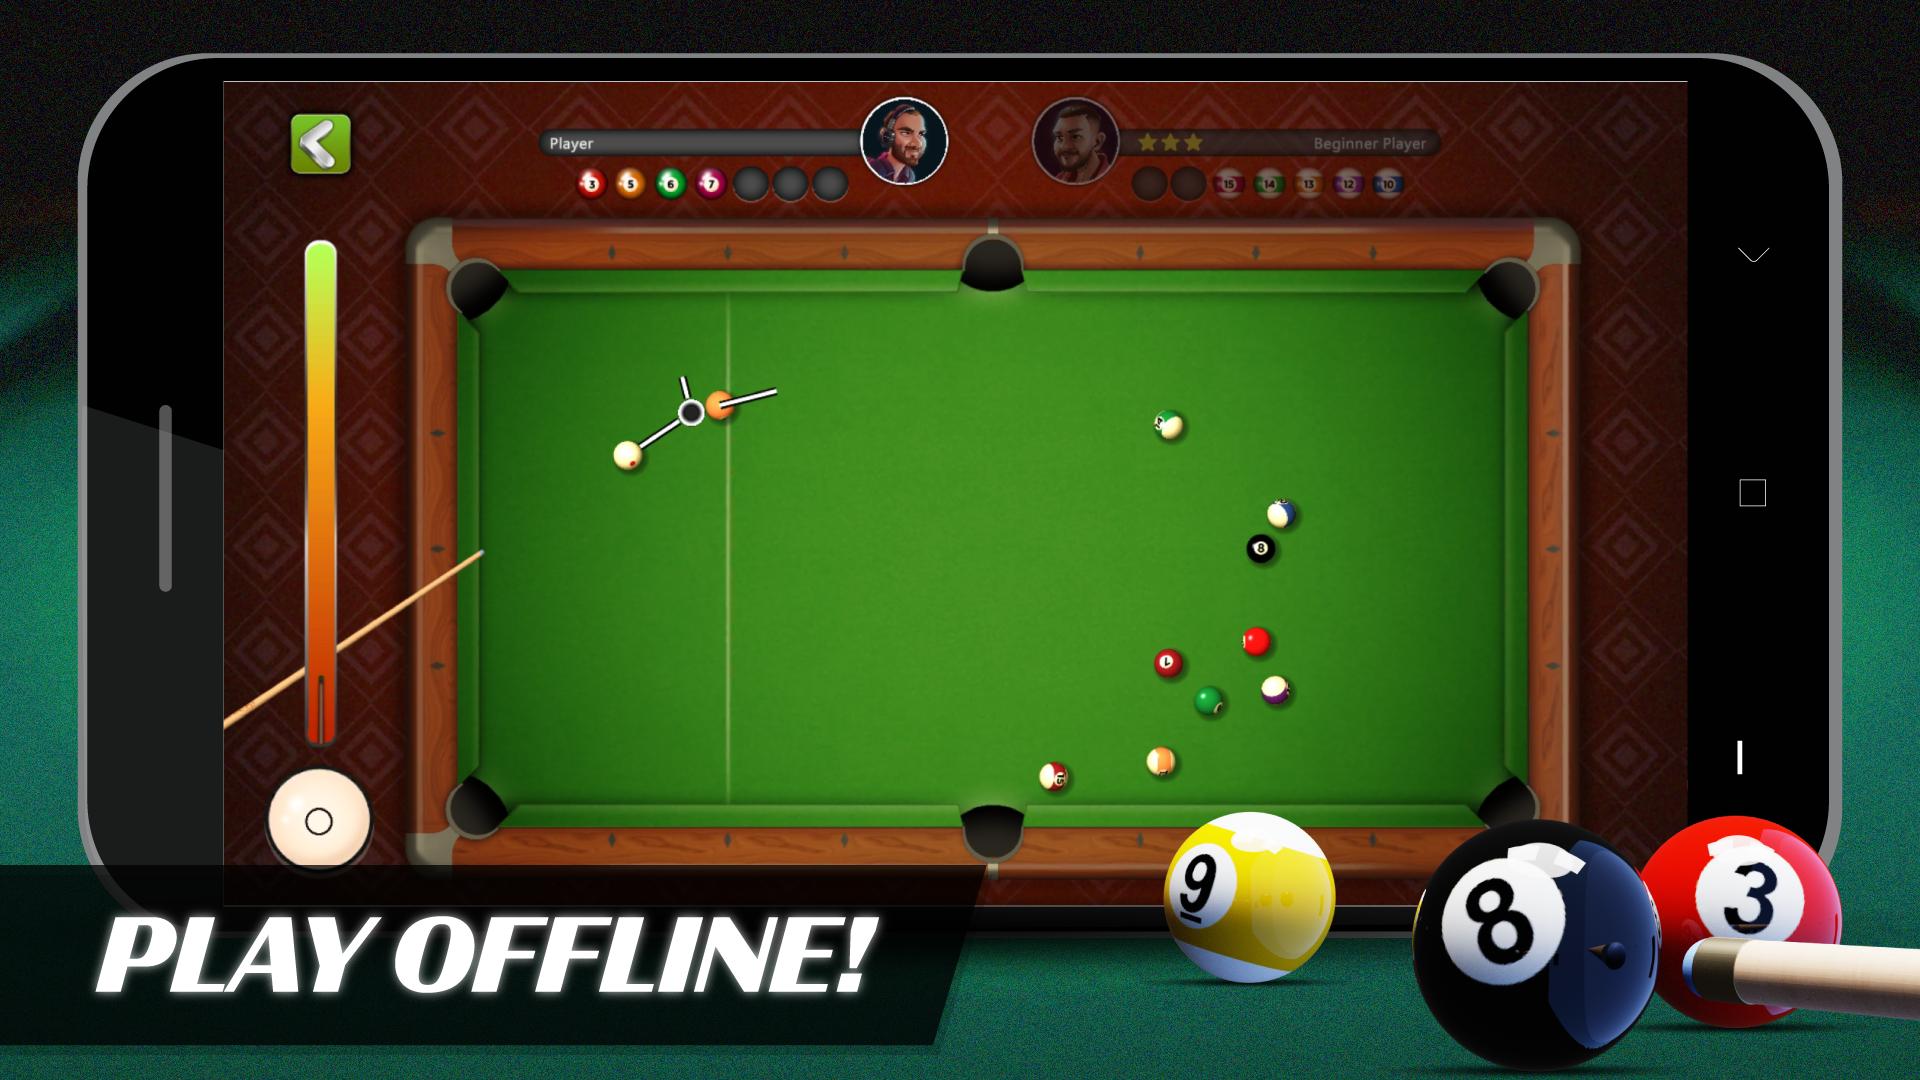 8 Ball Billiards - Offline Pool Game for Android - APK Download